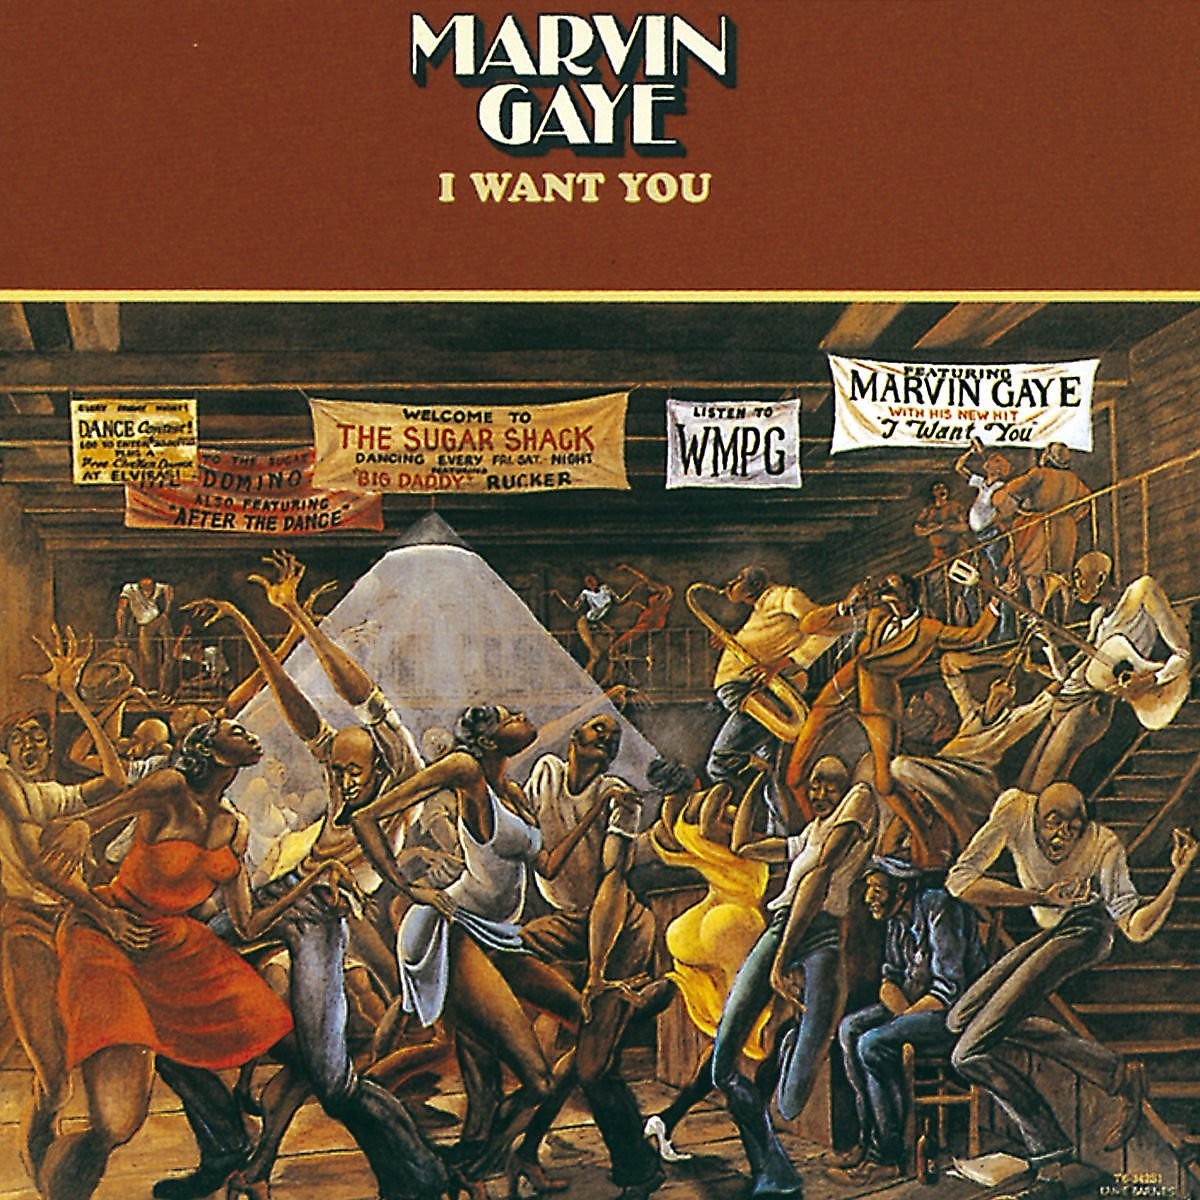 Marvin Gaye i want you